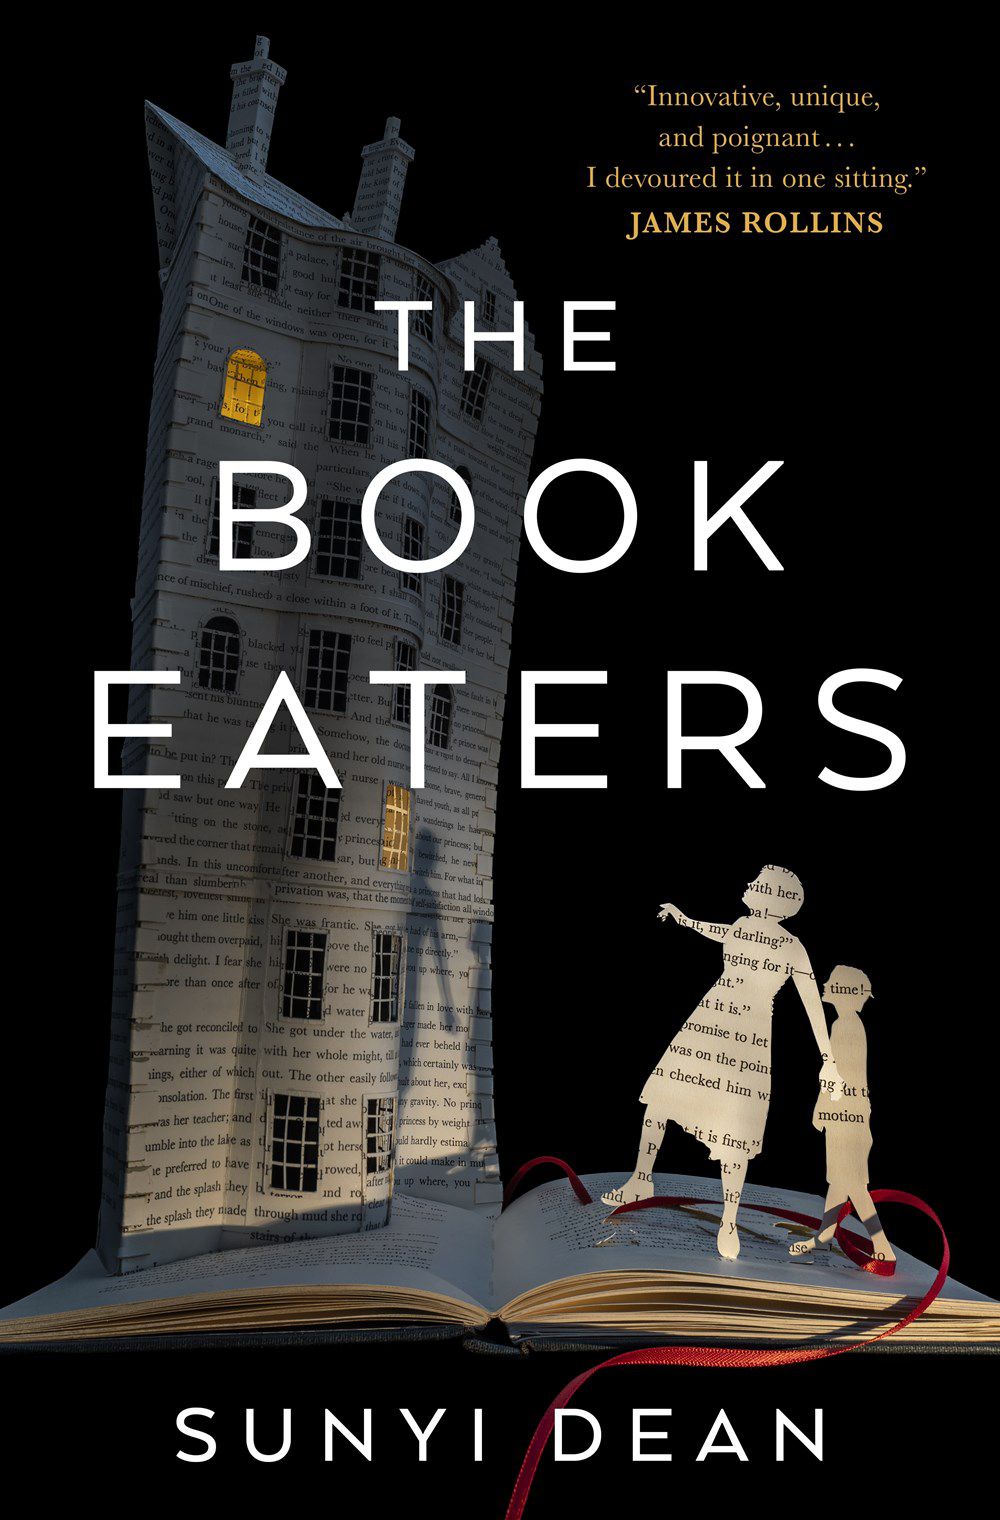 Cover image of The Book Eaters by Sunyi Dean, featuring a diorama image of a parent and child and a house, all made from the pages of a book, standing on top of a book.